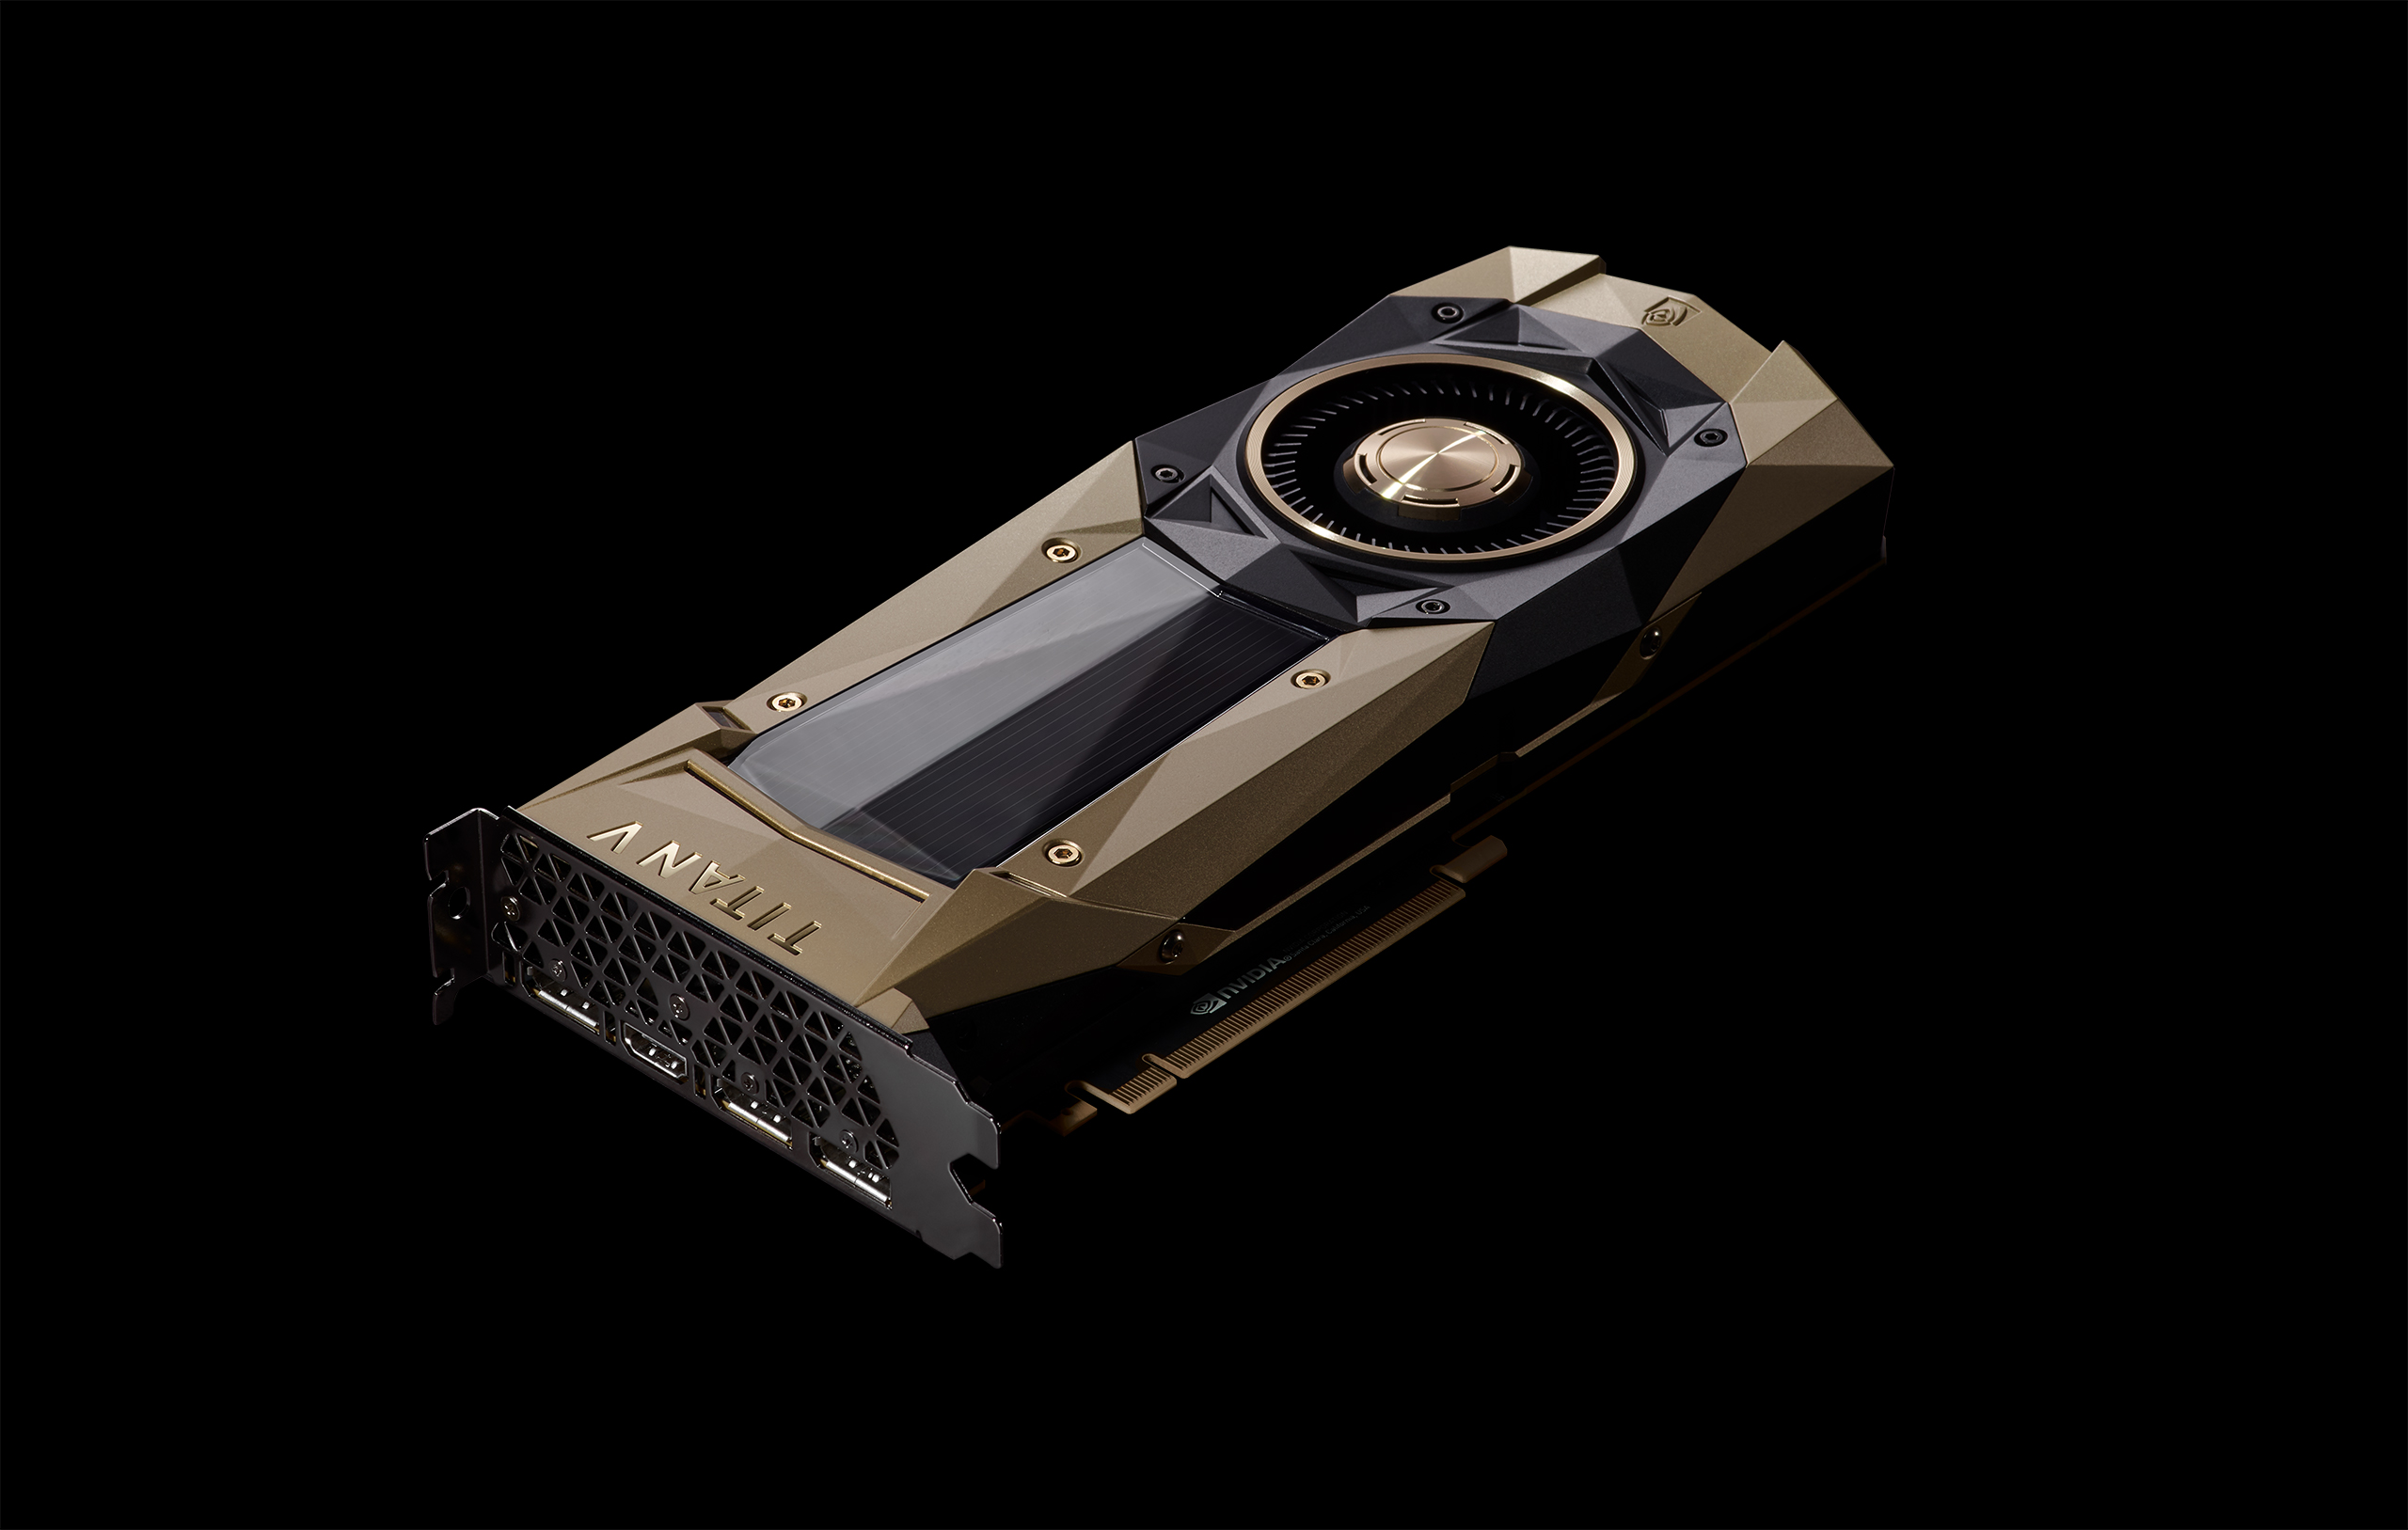 Nvidia’s new graphics card is 3,000, painted gold, and not meant for